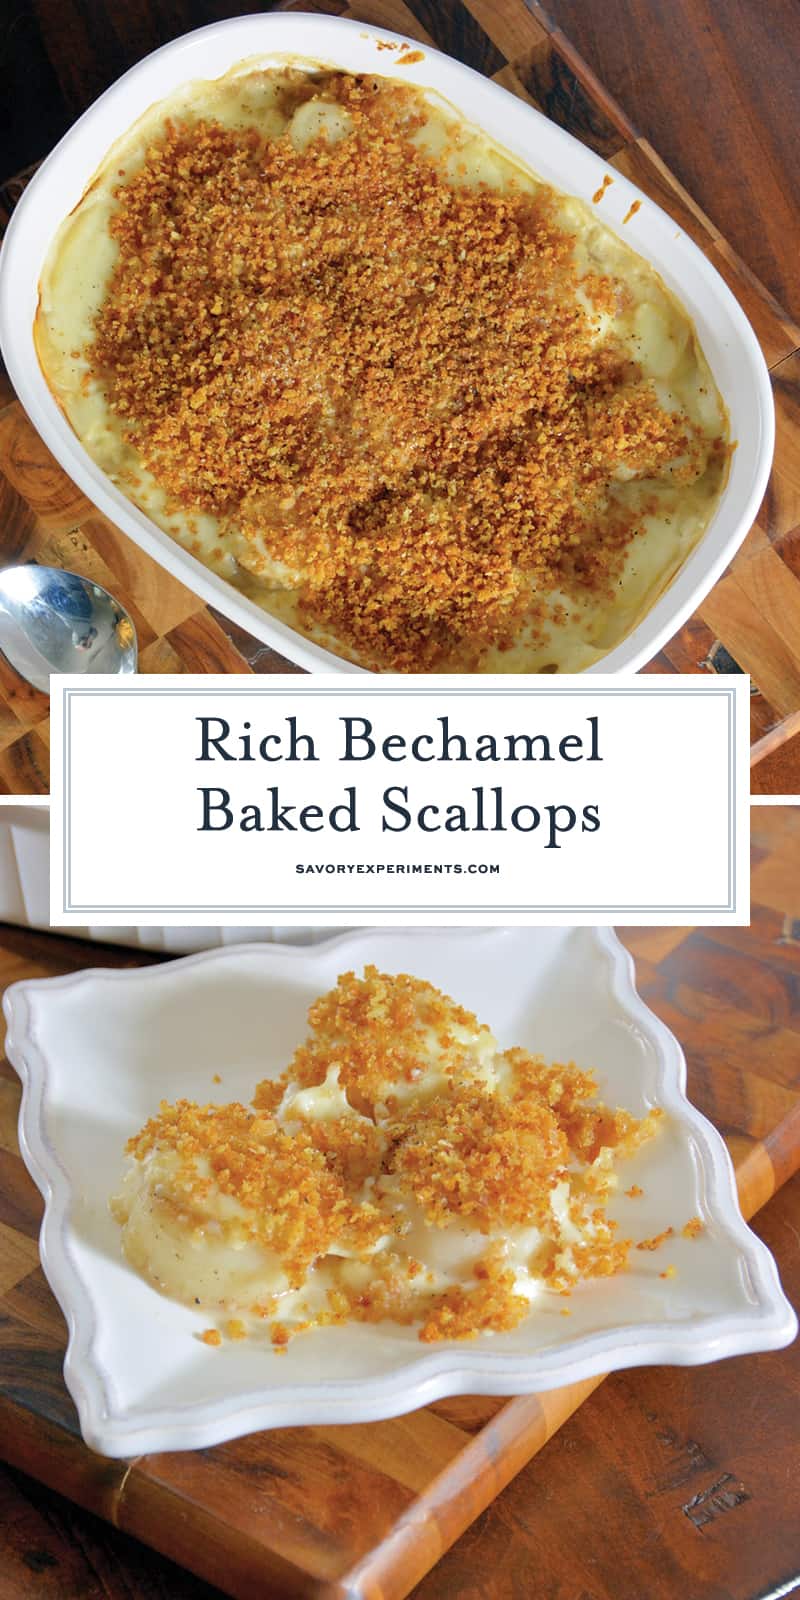 Bechamel Baked Scallops cover scallops in a spiced, creamy bechamel sauce and top with crunchy bread crumbs. The perfect side dish for steak or vegetarian entree! #scalloprecipe #howtomakescallopsathome www.savoryexperiments.com 